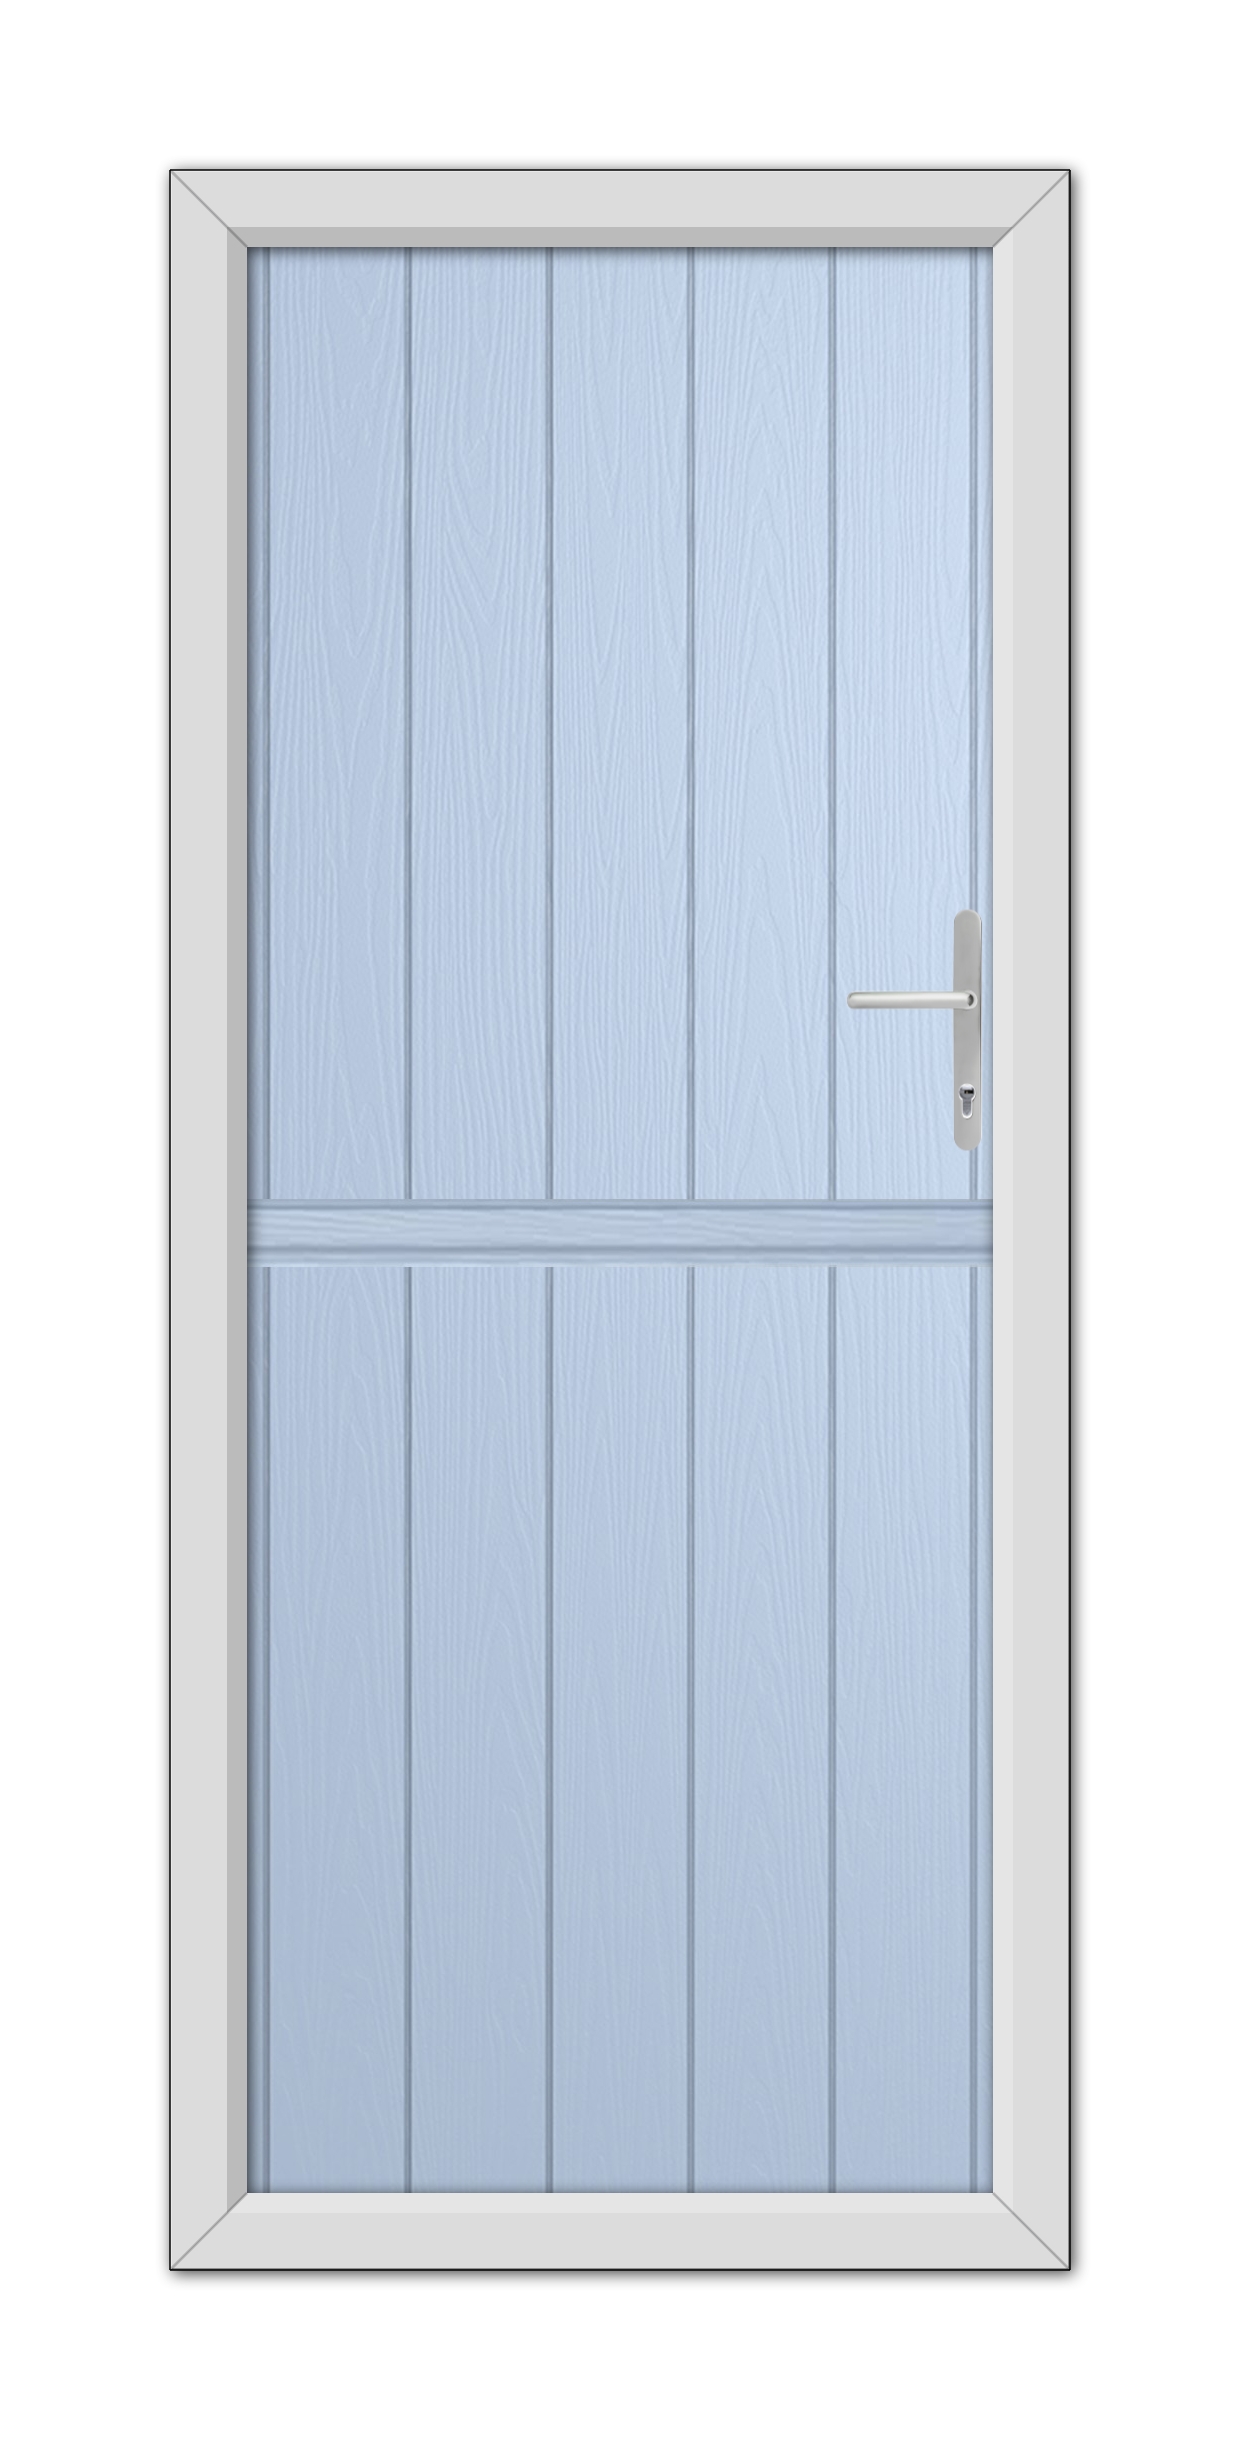 A Duck Egg Blue Gloucester Stable Composite Door 48mm Timber Core with a silver handle, featuring a horizontal half window, set within a white frame.